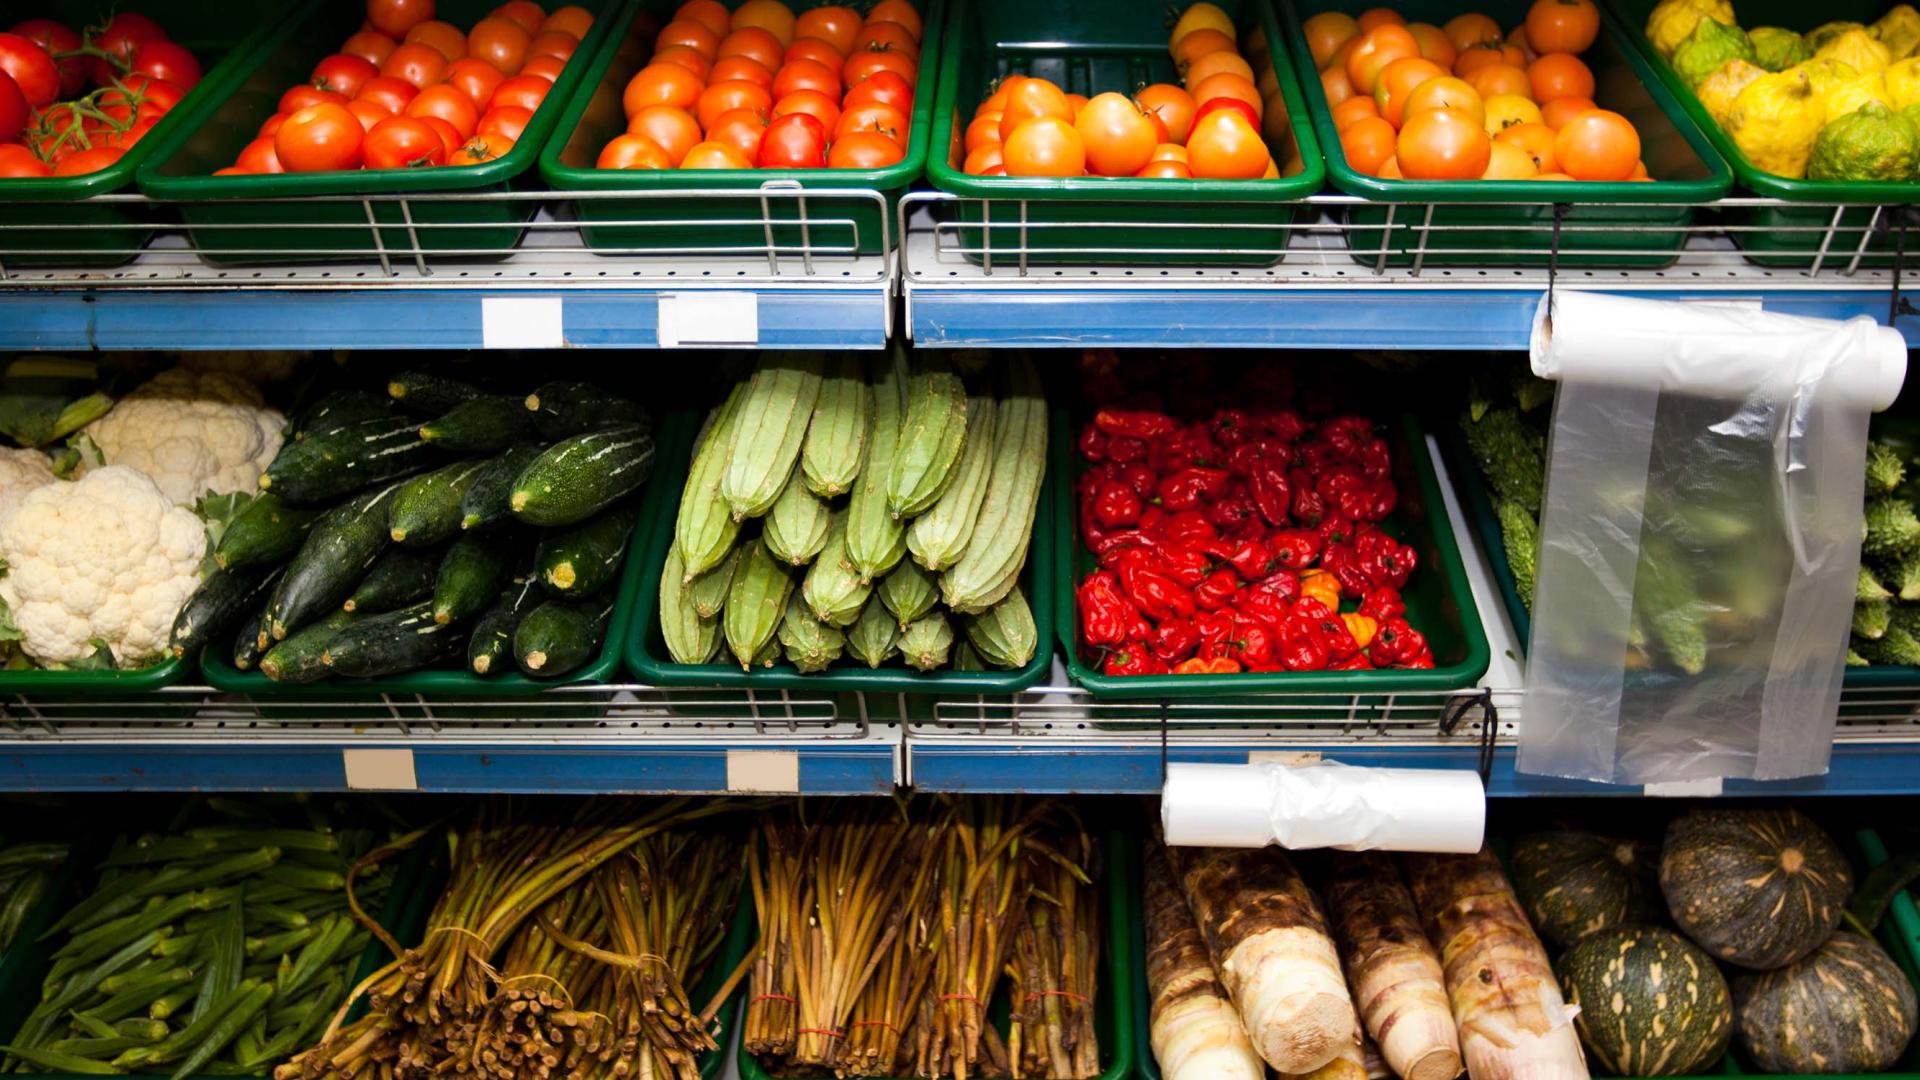 Fruit and vegetable aisle in supermarket